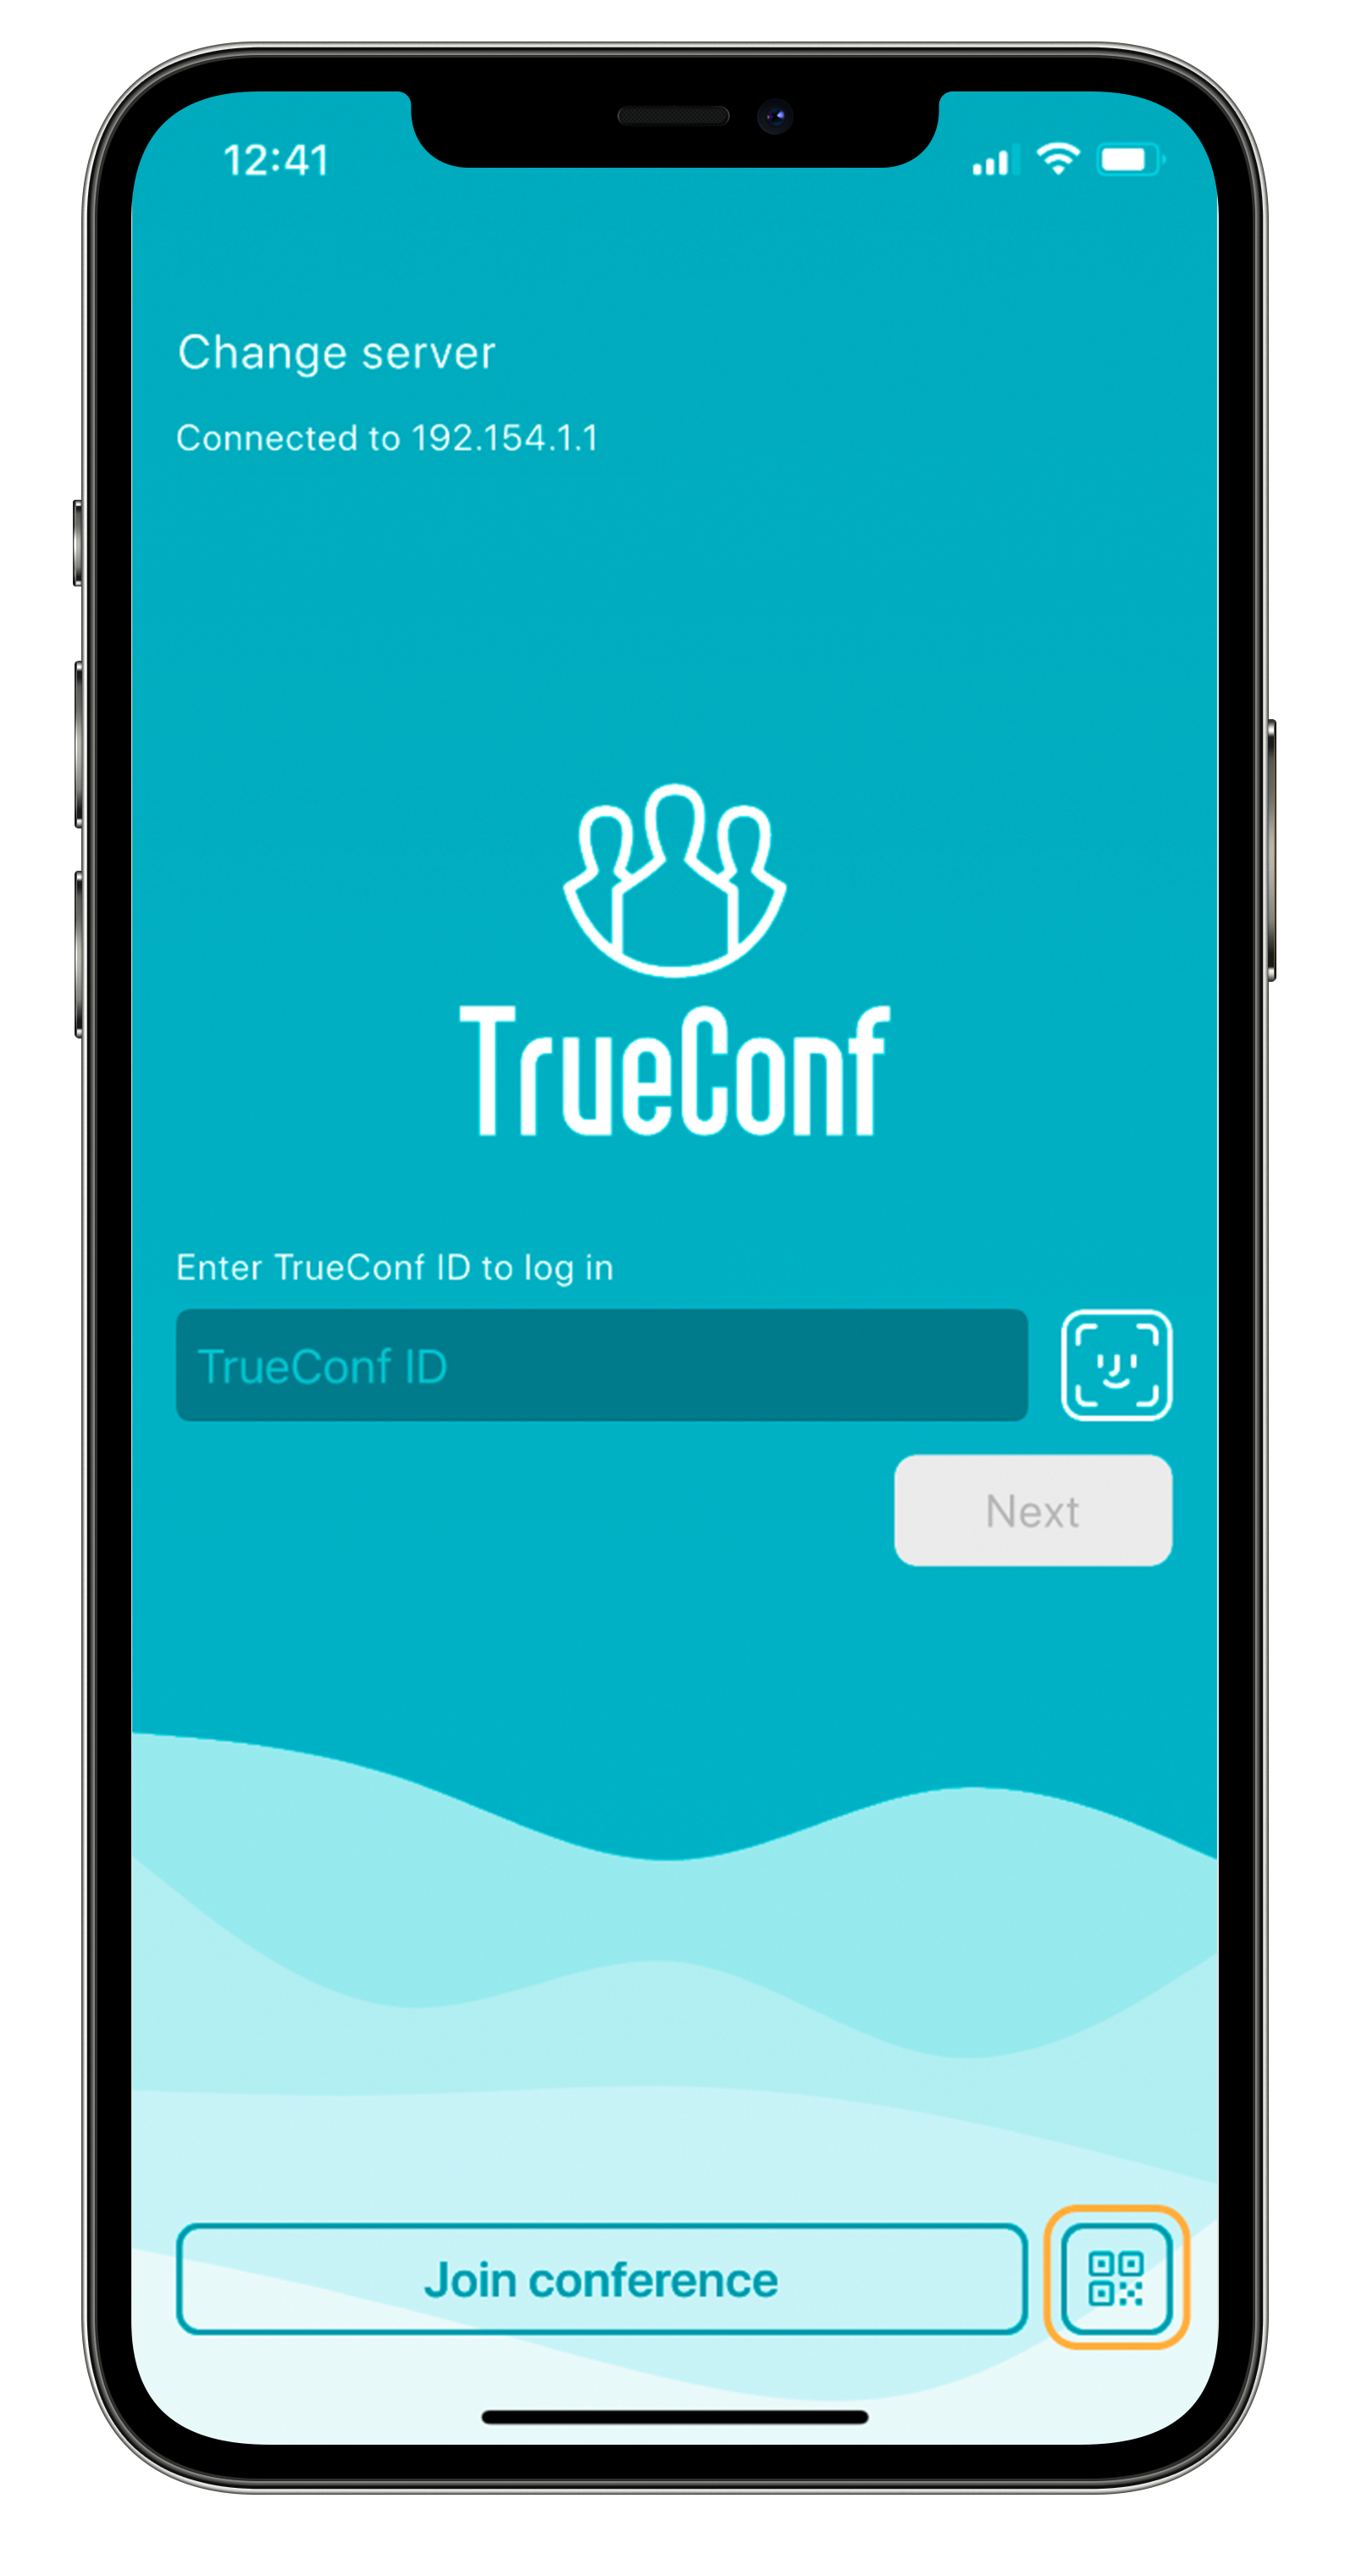 TrueConf 3.2.3 for iOS: Page-by-page display, VAD, and PIN-protected meetings 6